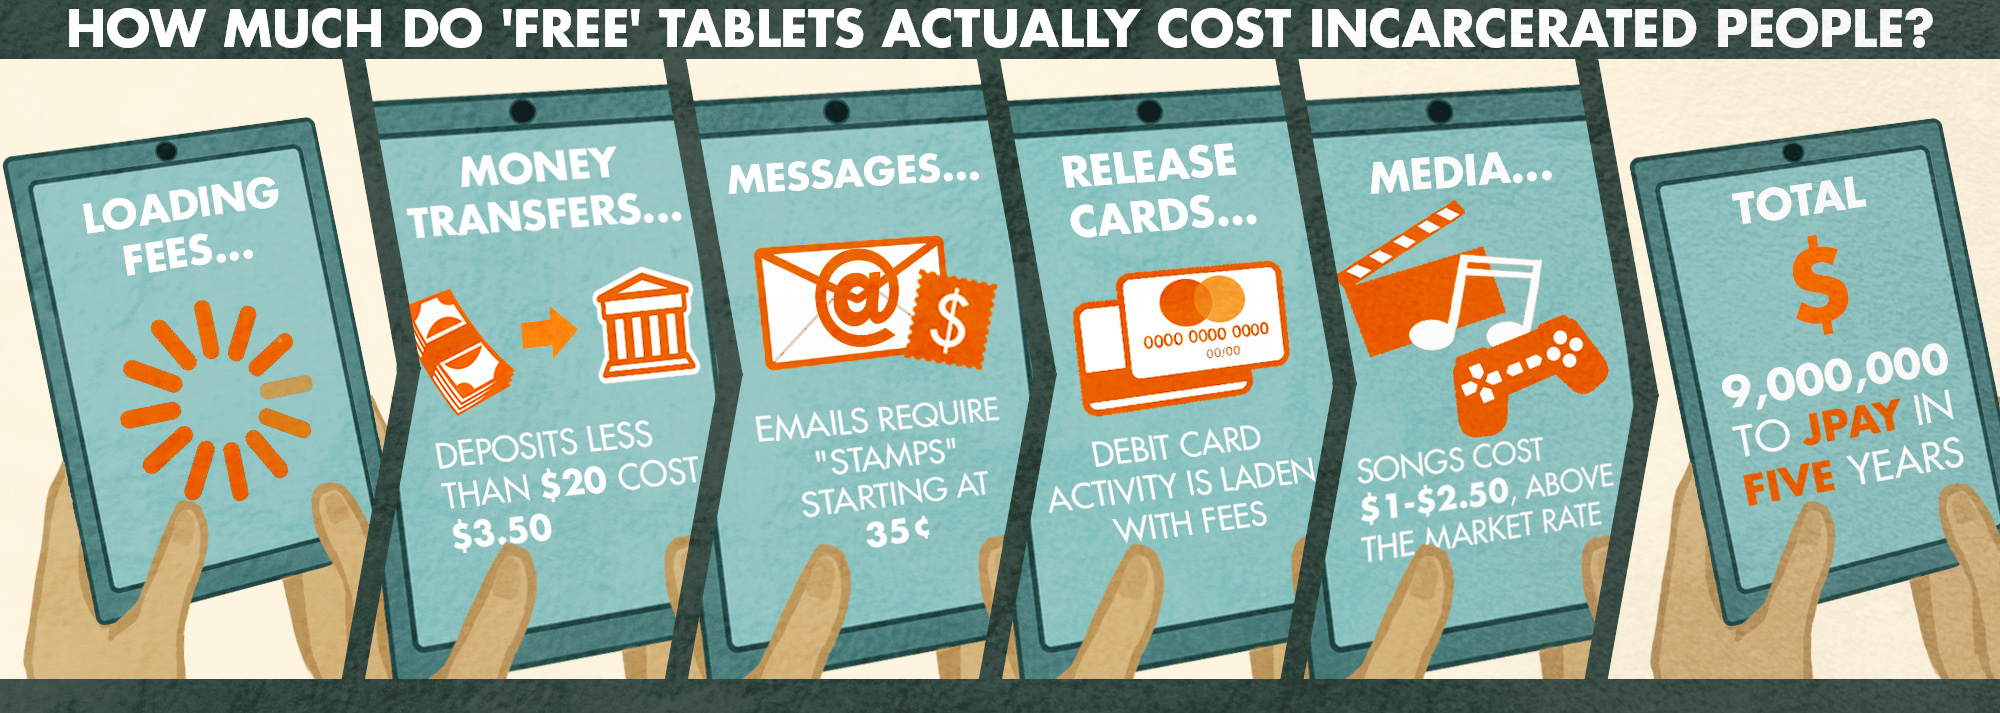 Graphic explaining how much money 'free' tablets actually cost incarcerated people.